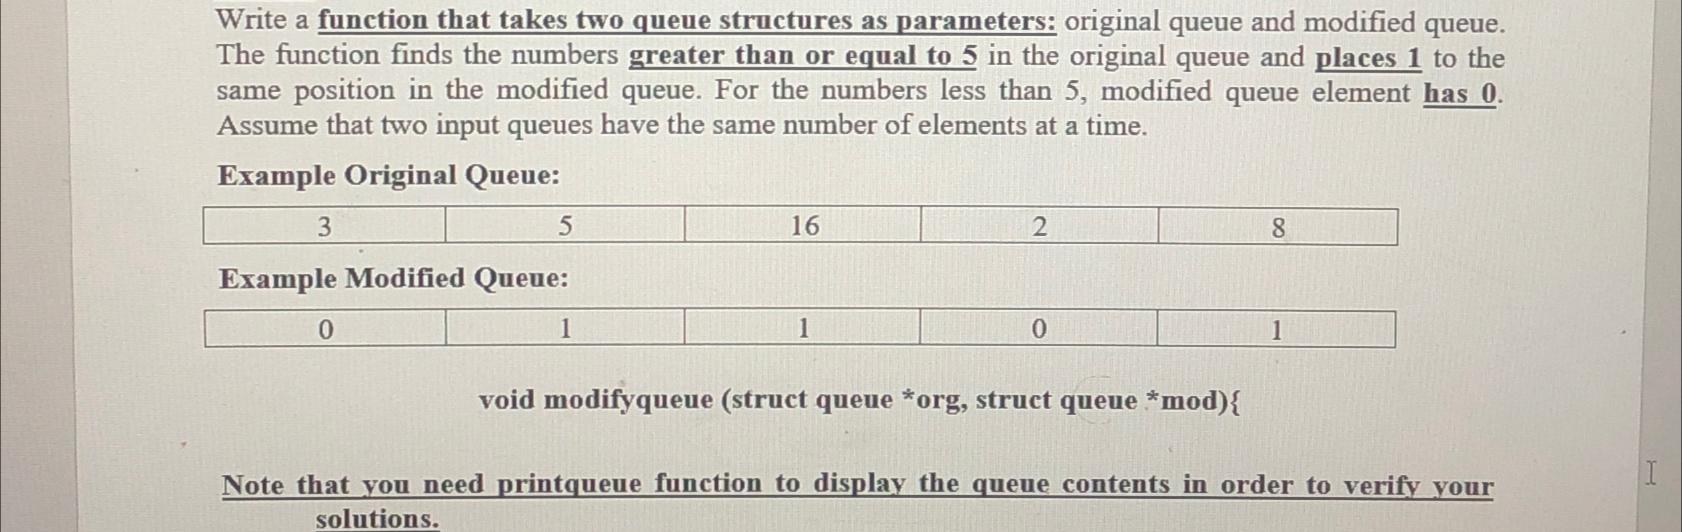 Write a function that takes two queue structures as parameters: original queue and modified queue. The